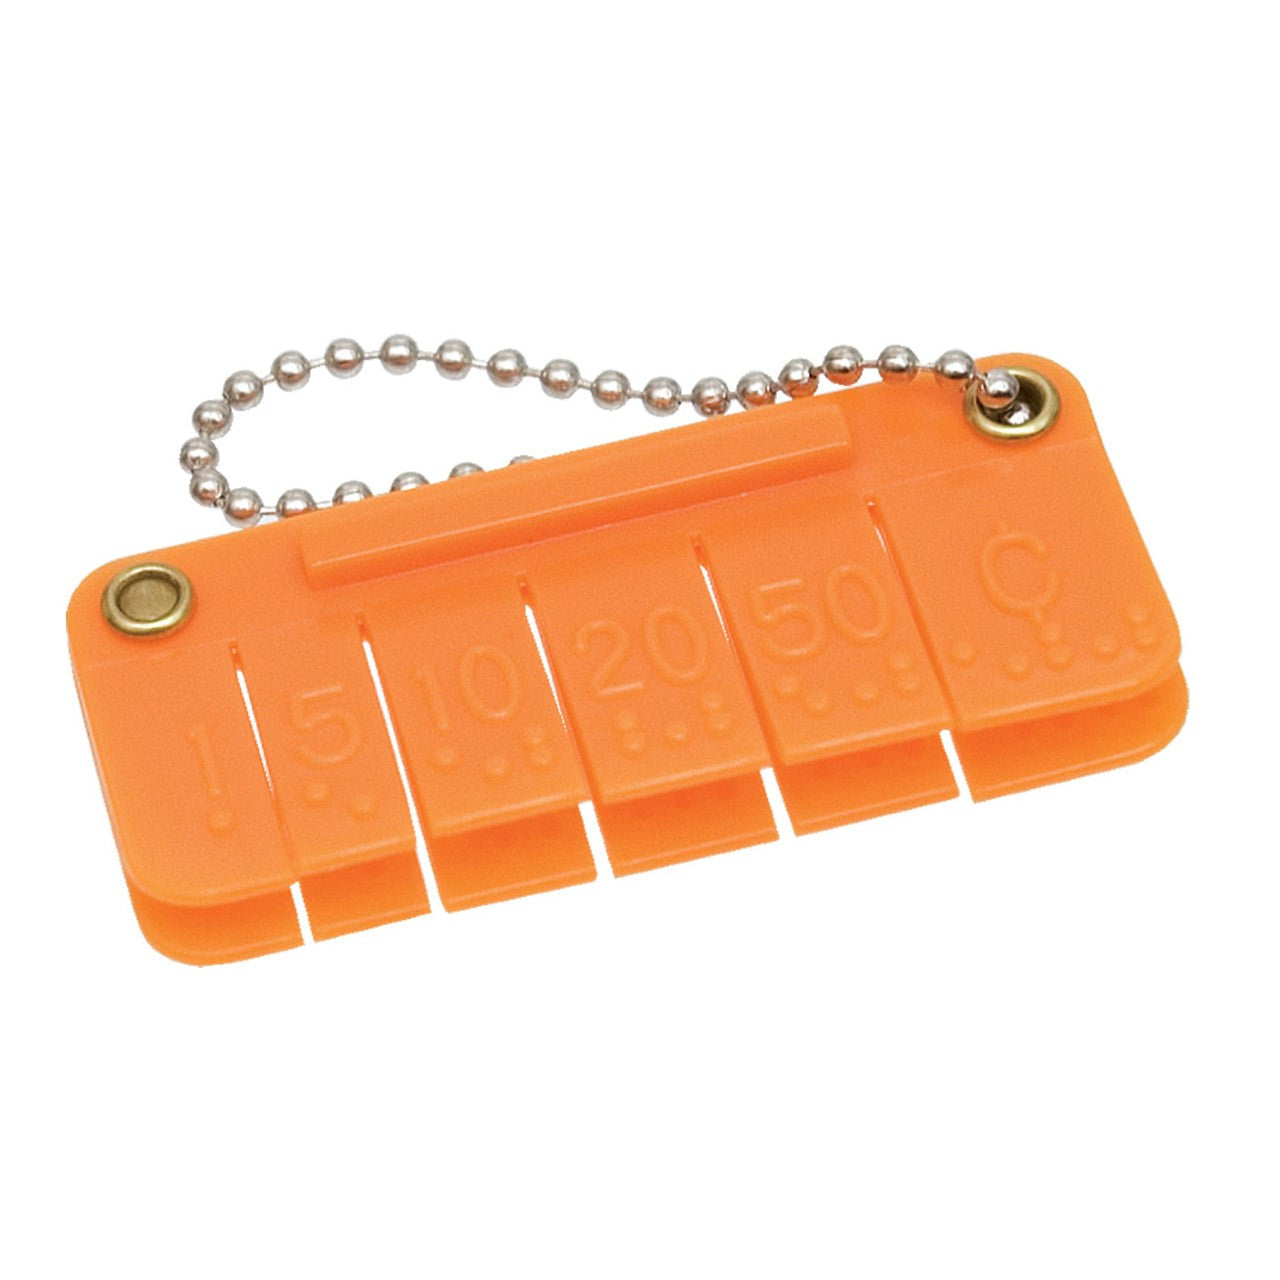 A small orange plastic device used to imprint braille on money.  It has braille markings for $1, $5, $10, $20 and $50